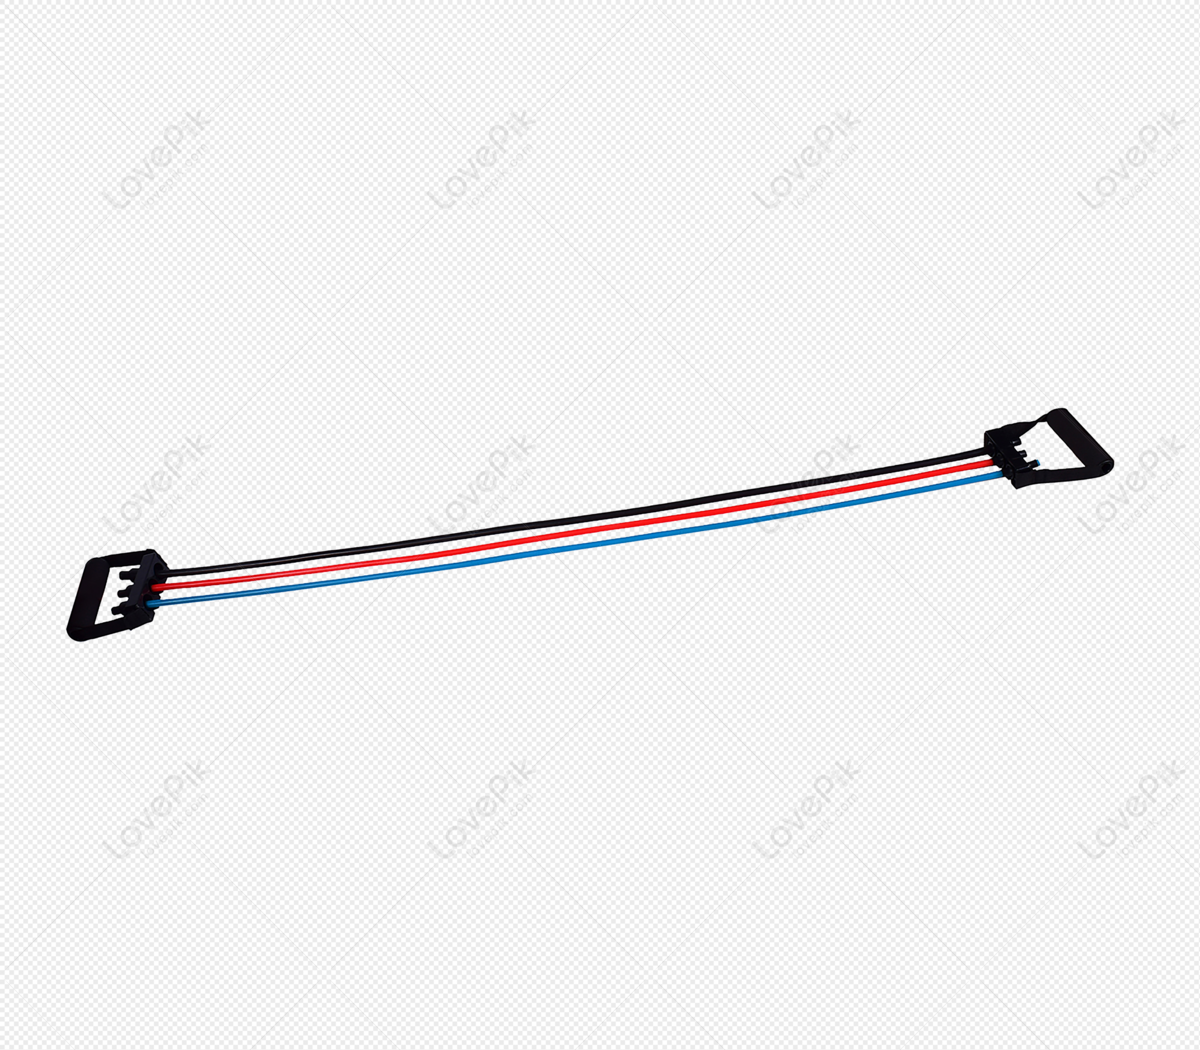 Pull Band PNG Transparent And Clipart Image For Free Download - Lovepik